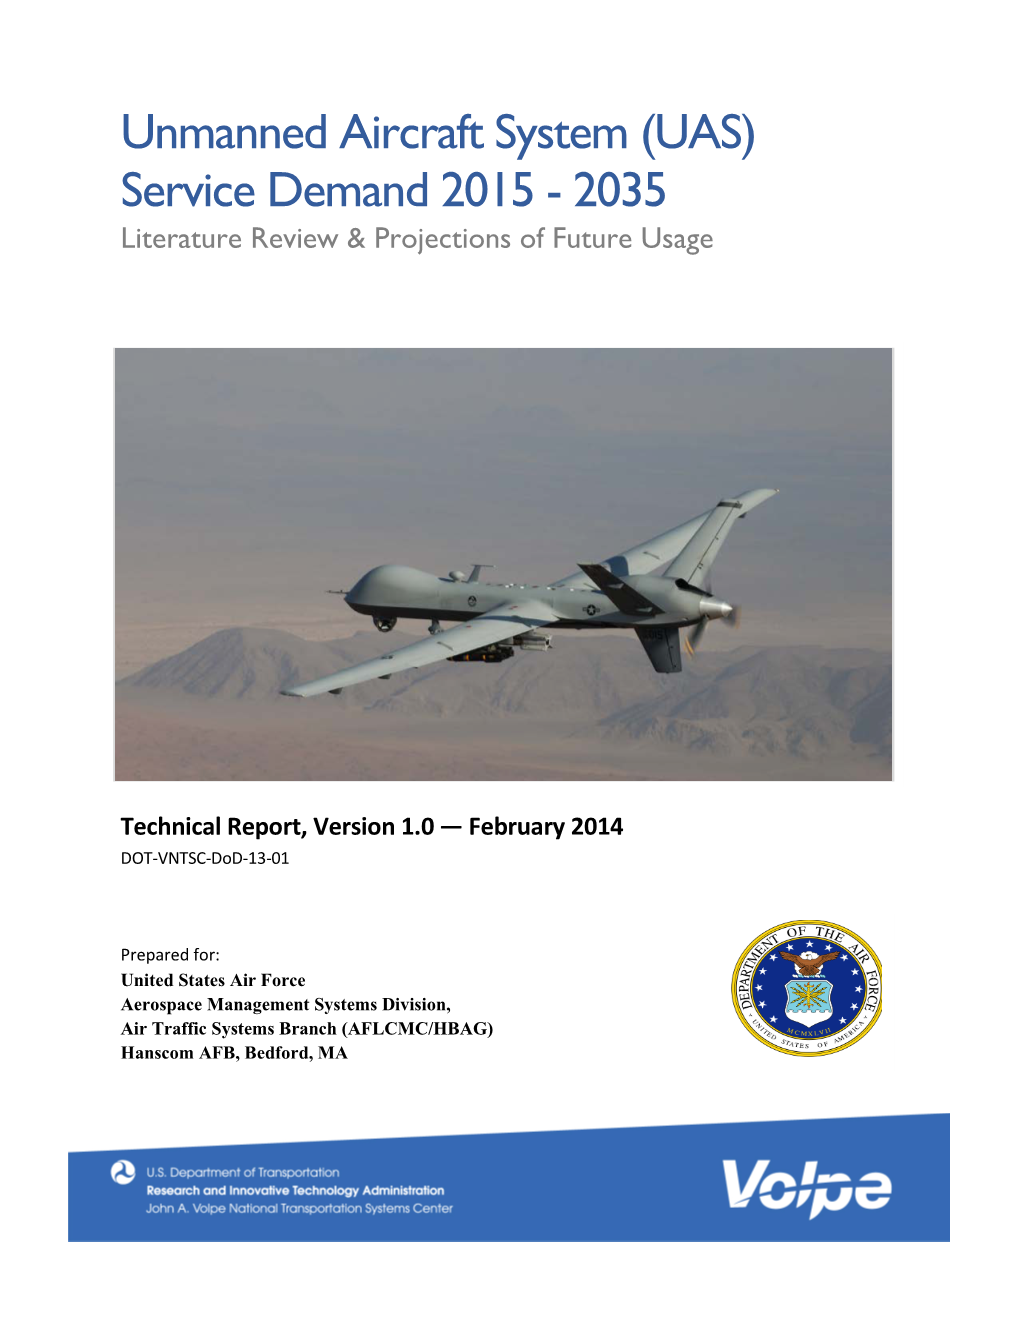 5.1 Unmanned Aircraft Systems (UAS) Business Model Development